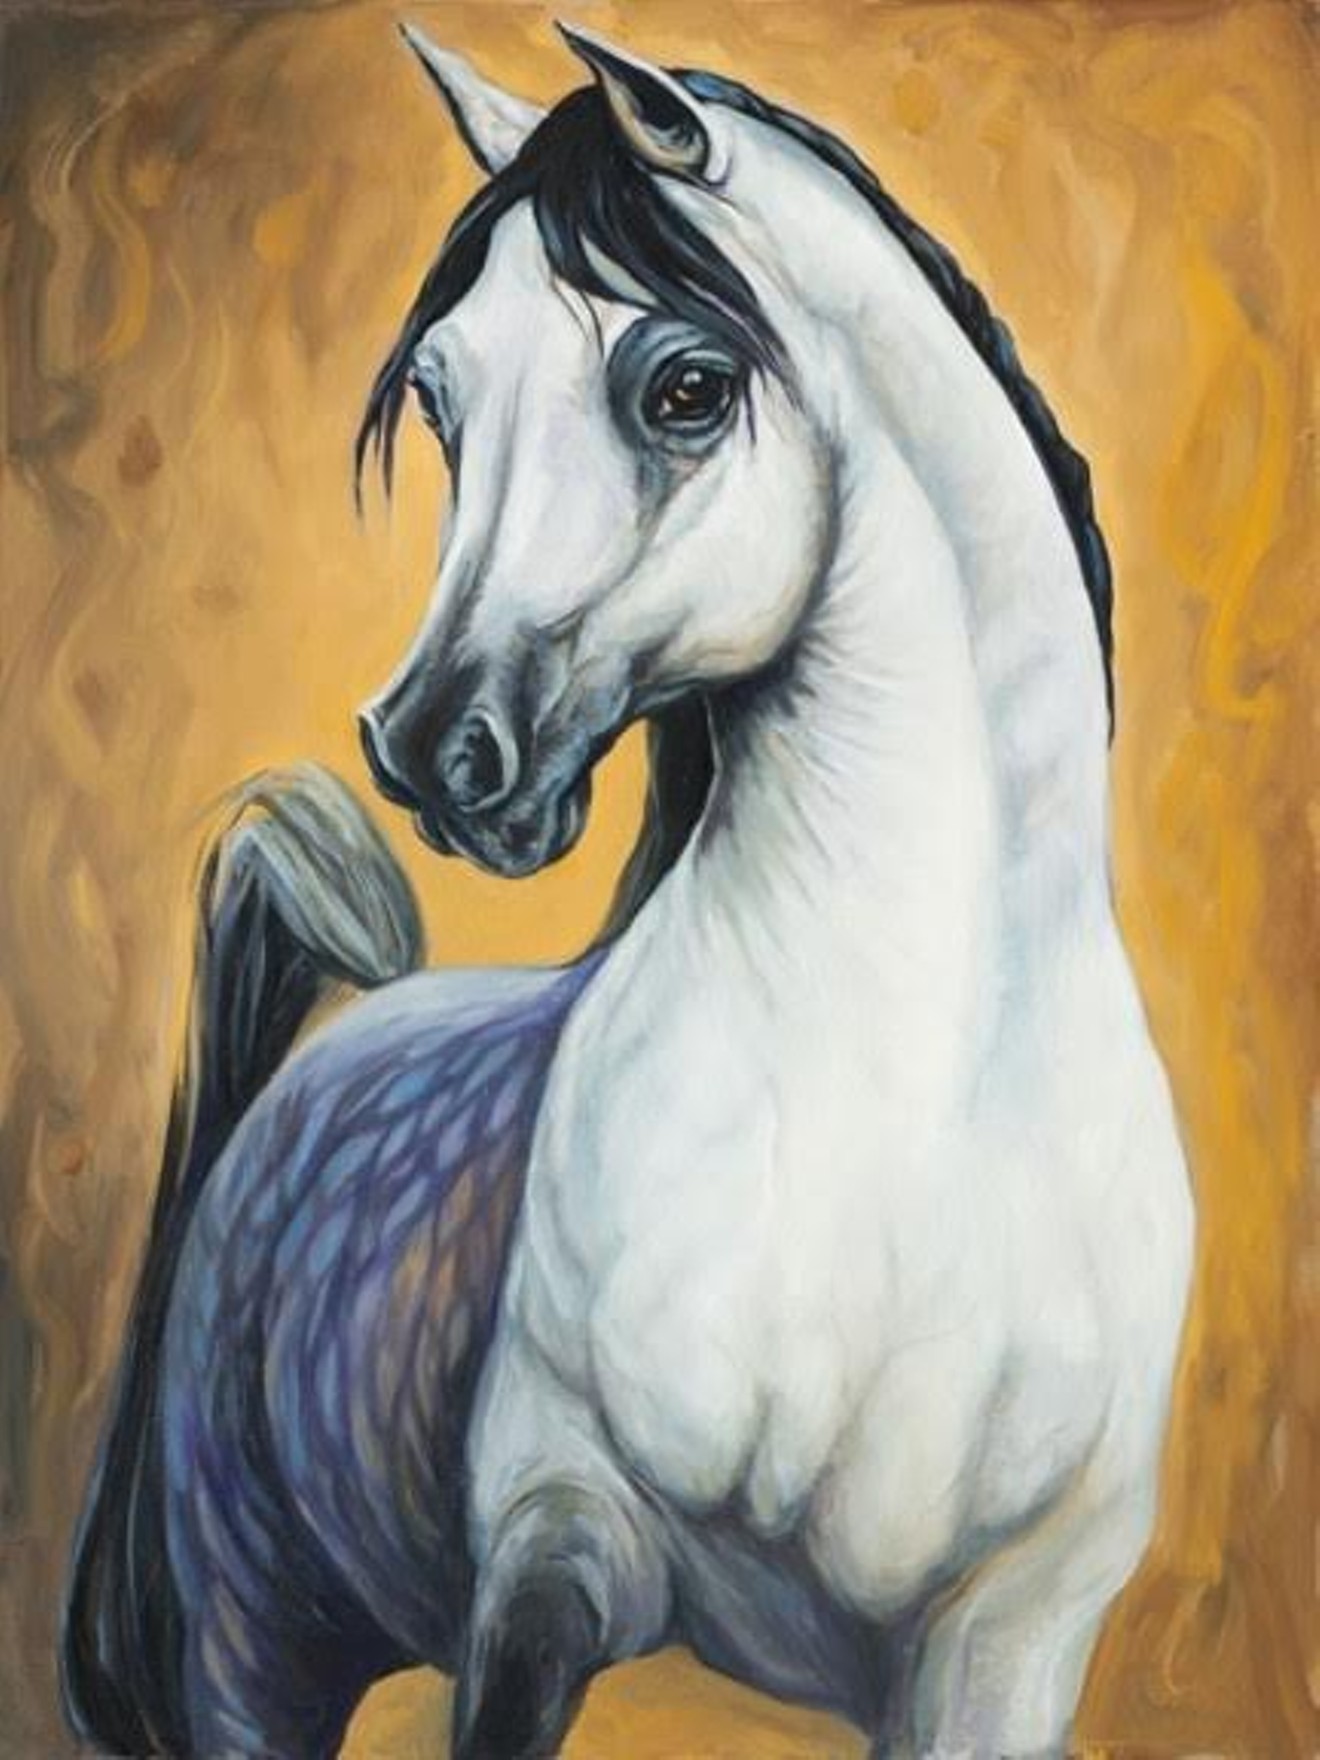 See Patricia Rupert's work in a horse-themed art show in Surprise.